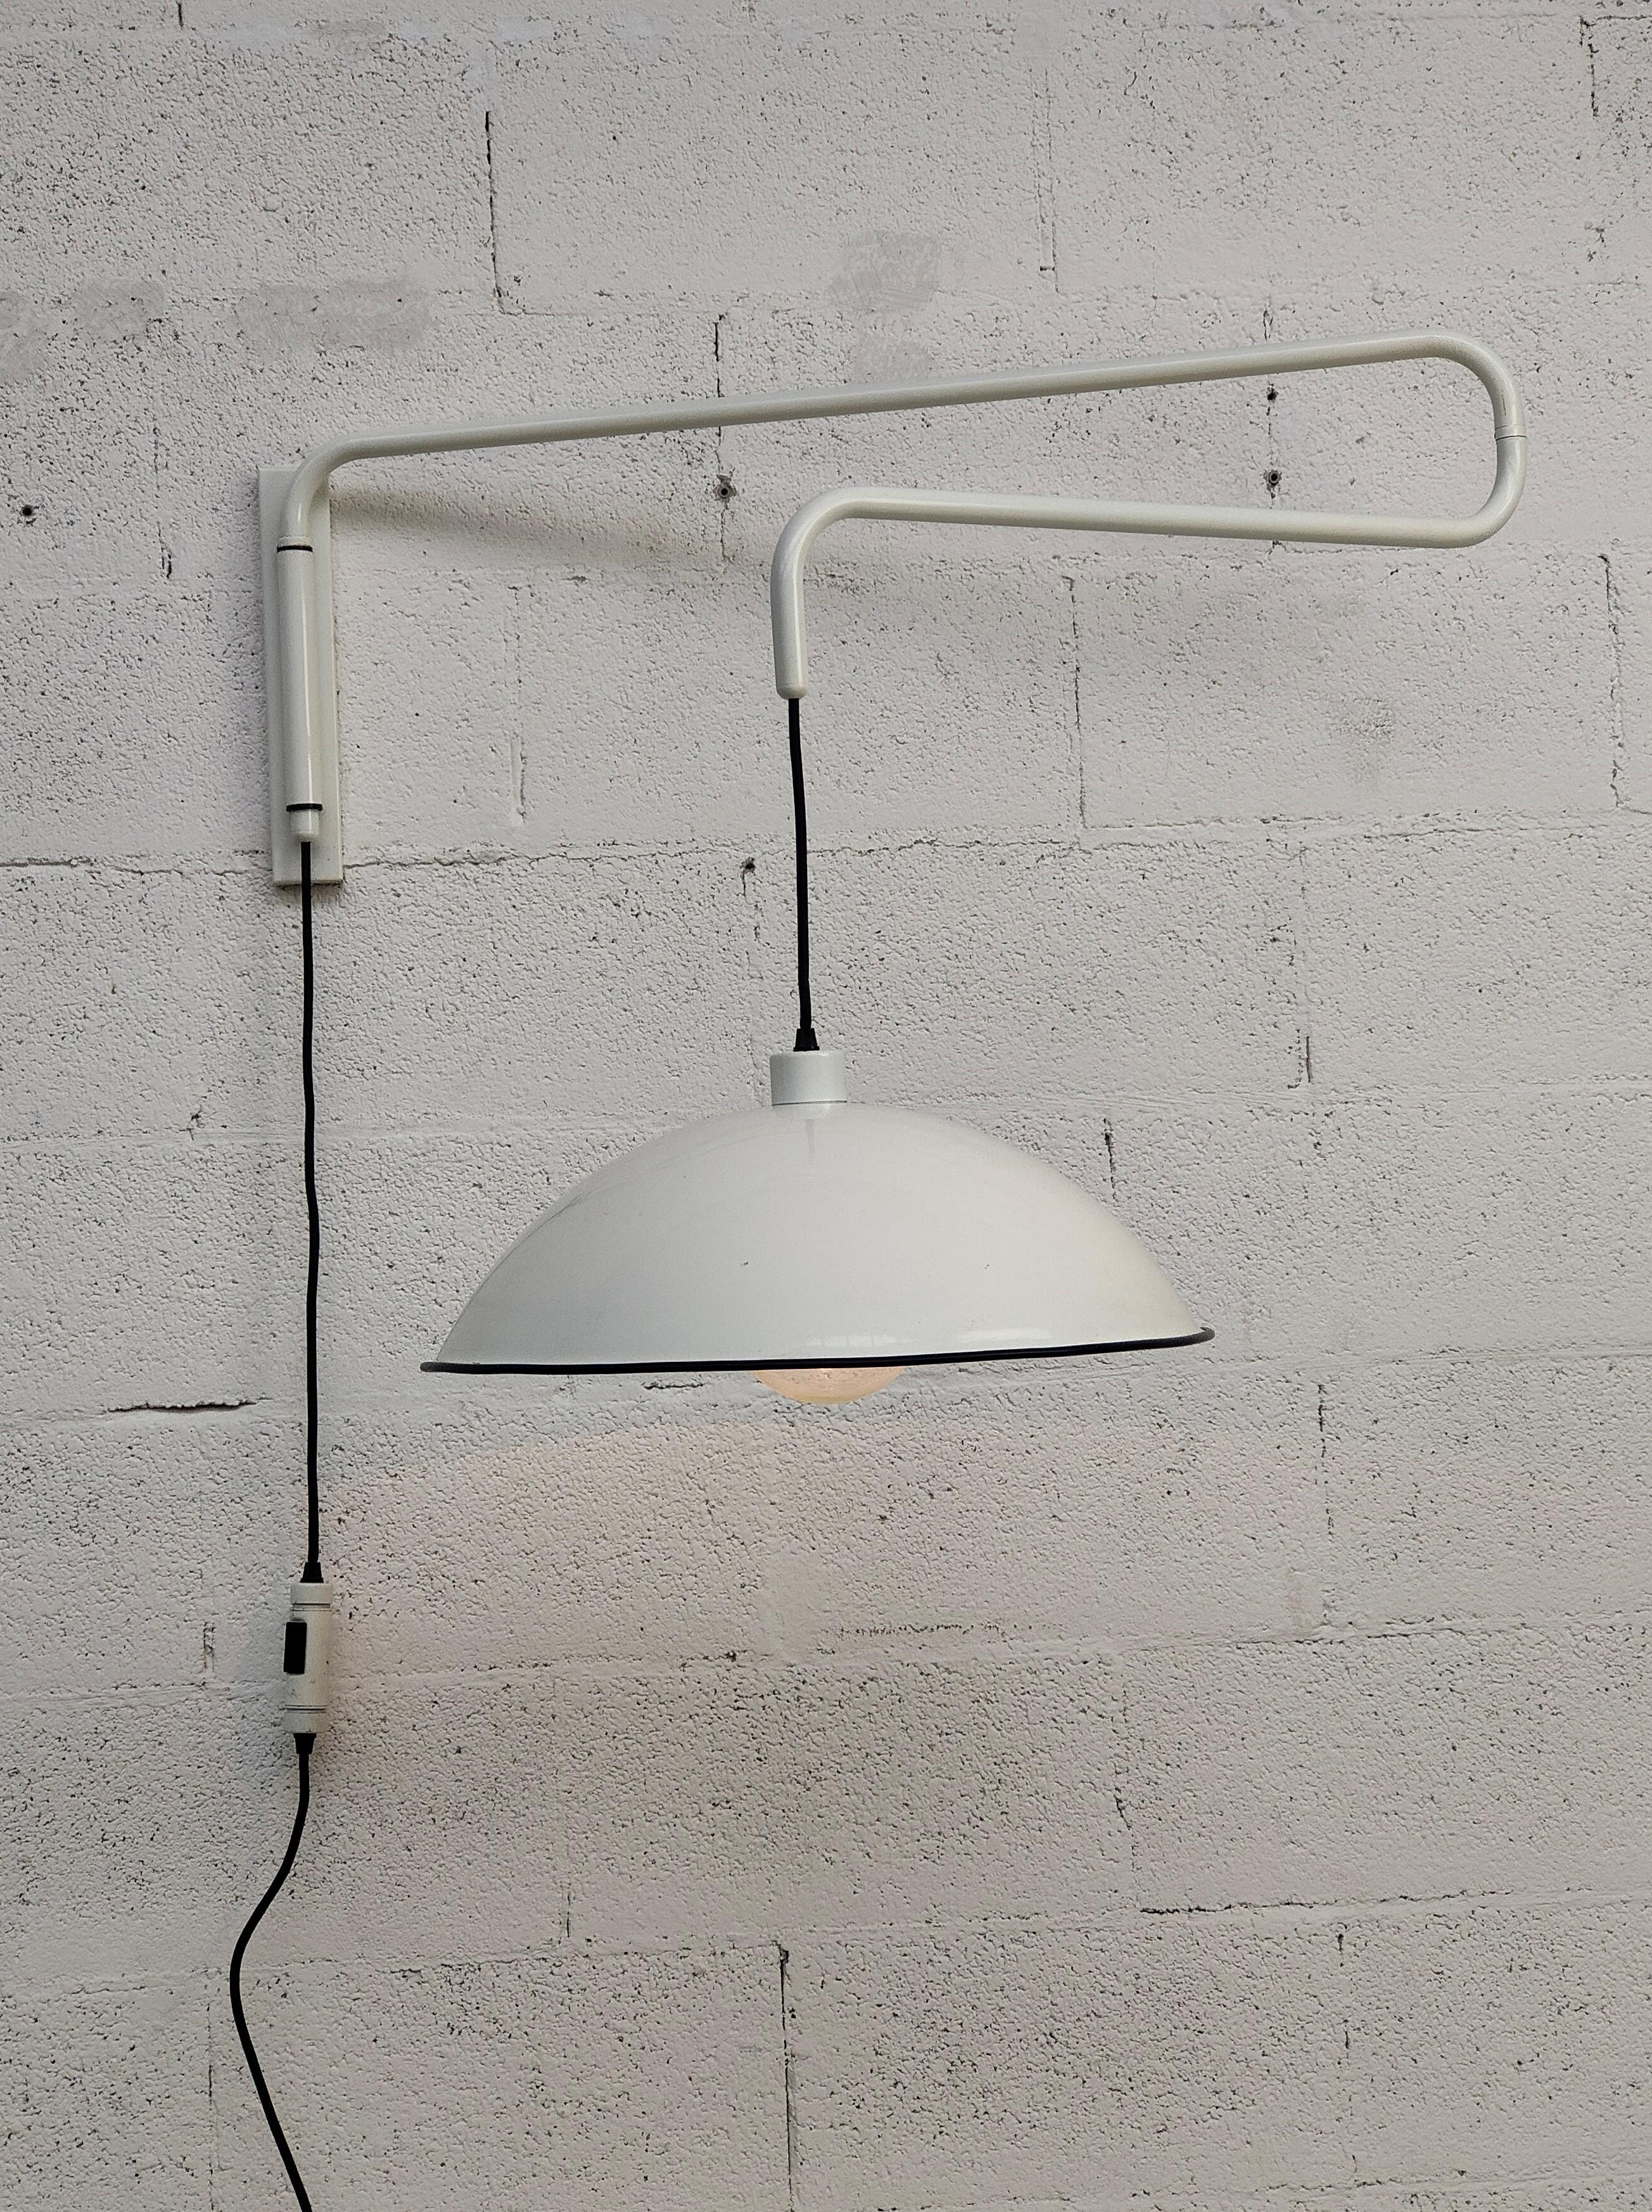 Height adjustable, swiveling wall lamp designed by Elio Martinelli for Martinelli Luce 60s. 
The lamp has a swiveling, fully adjustable stem. 
The 40 cm diameter shade is height adjustable with a black steel counterweight with integrated light